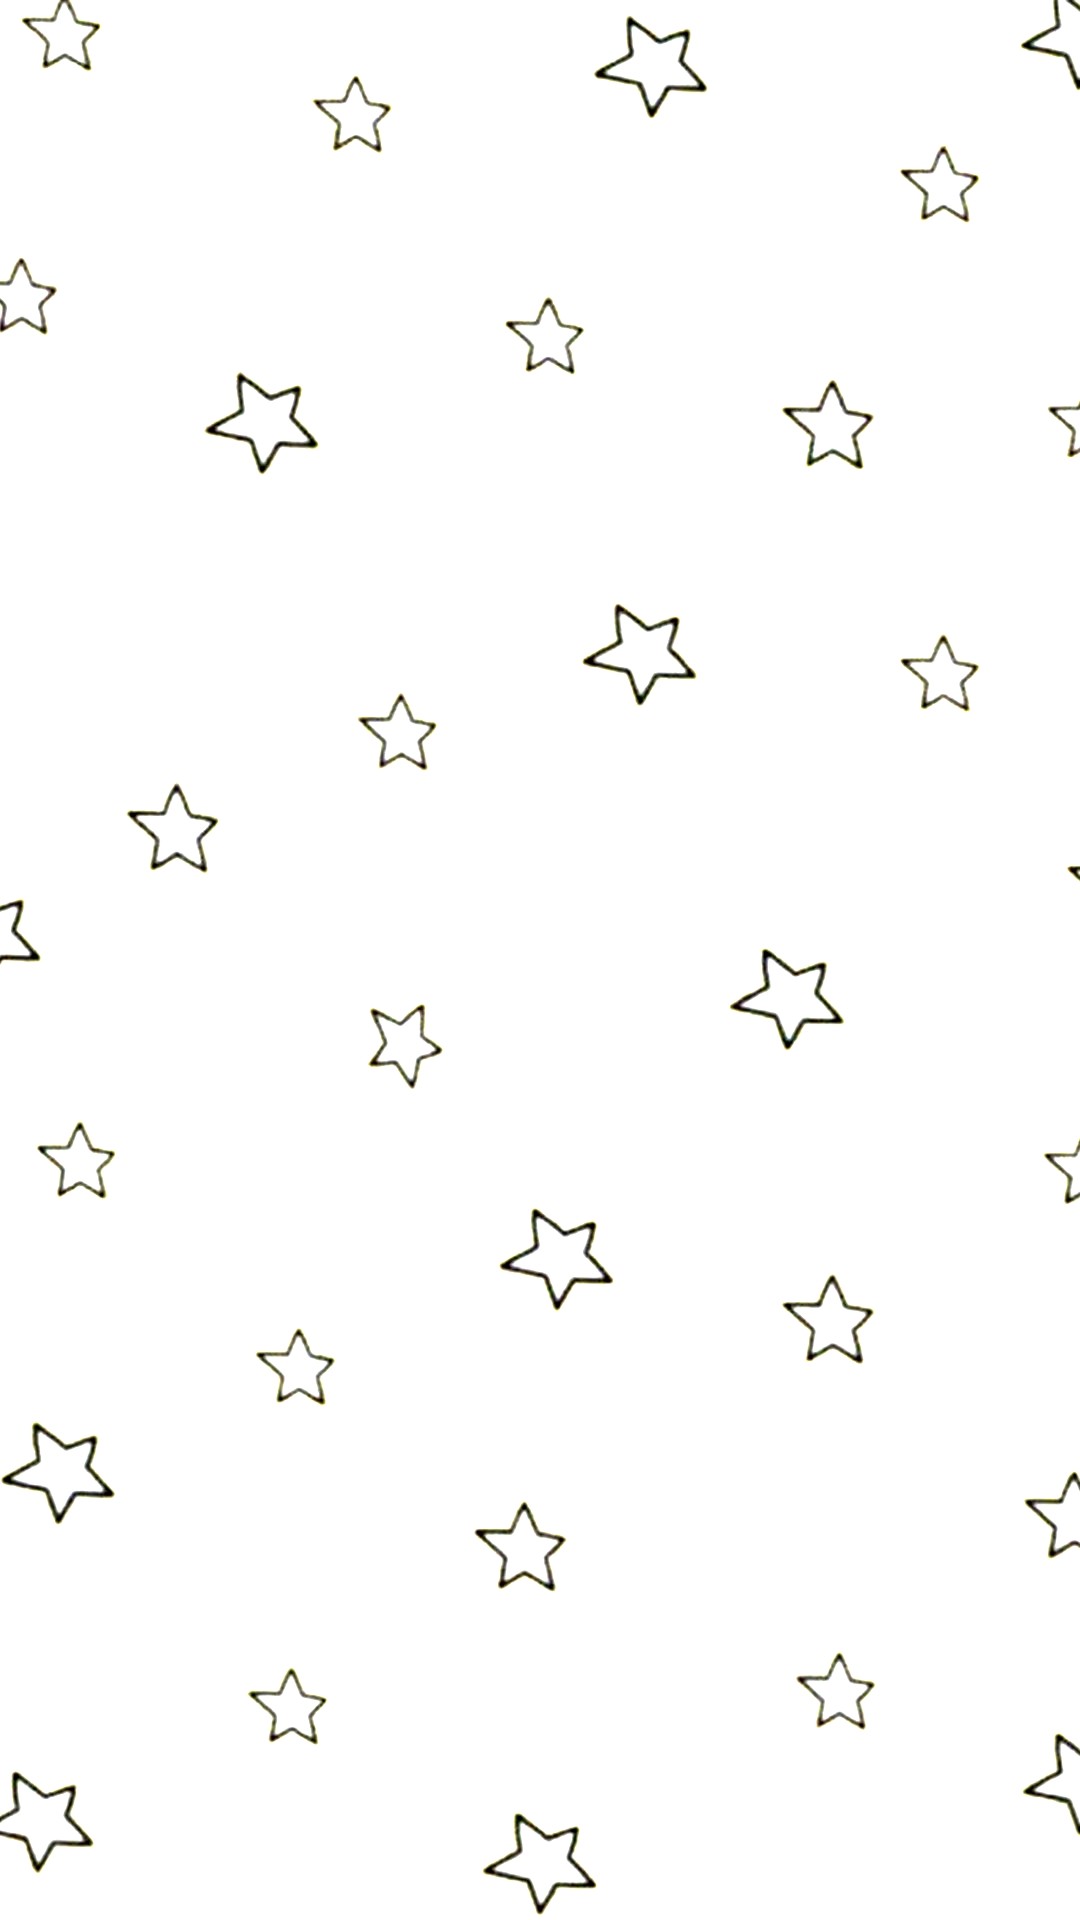 Stars Aesthetic Wallpaper Android with high-resolution 1080x1920 pixel. You can use this wallpaper for your Android backgrounds, Tablet, Samsung Screensavers, Mobile Phone Lock Screen and another Smartphones device